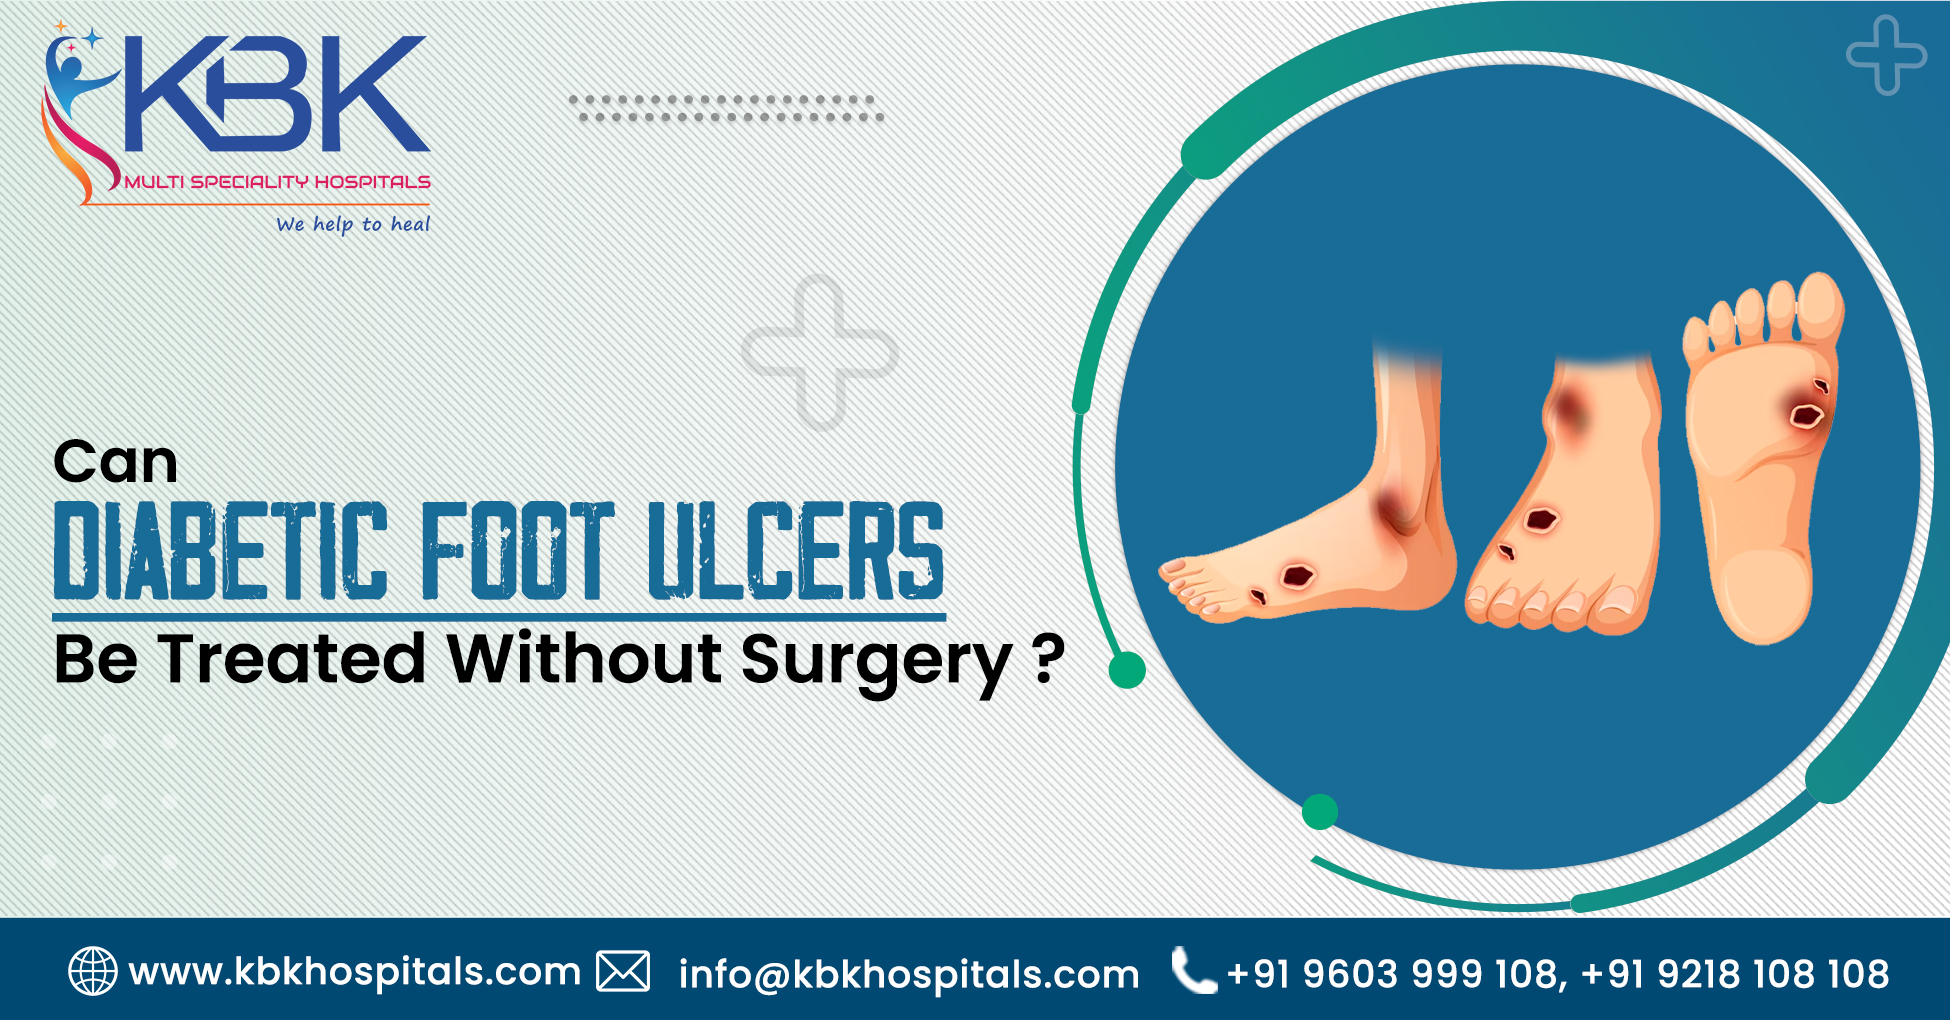 Can Diabetic Foot Ulcers be treated without Surgery